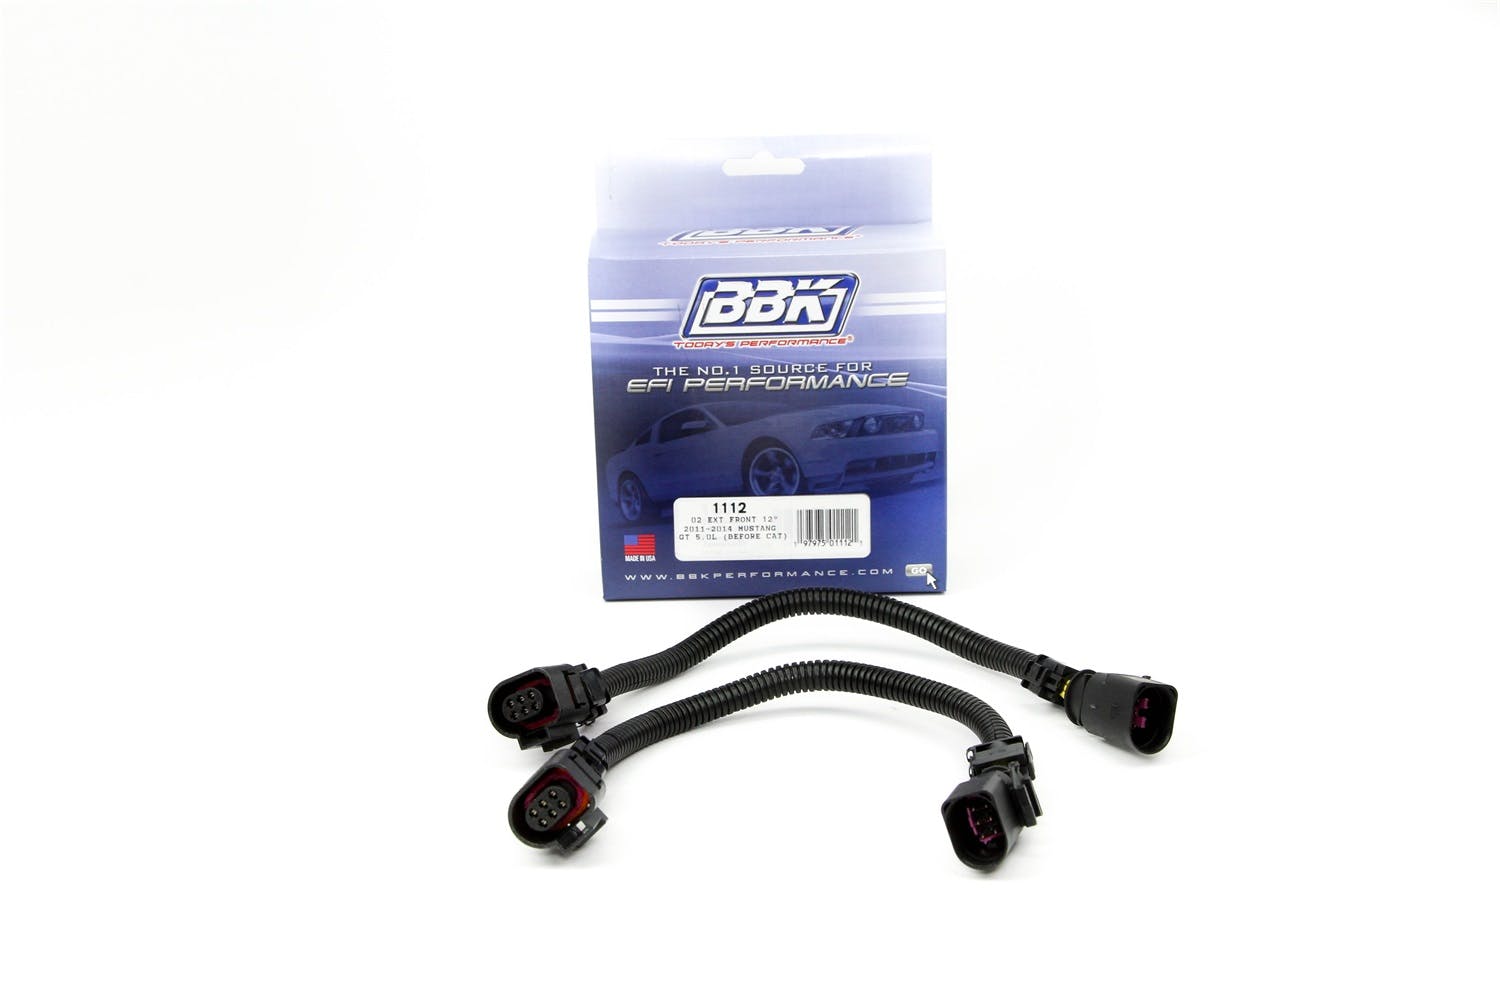 BBK Performance Parts 1112 O2 Sensor Wire Extension Harness